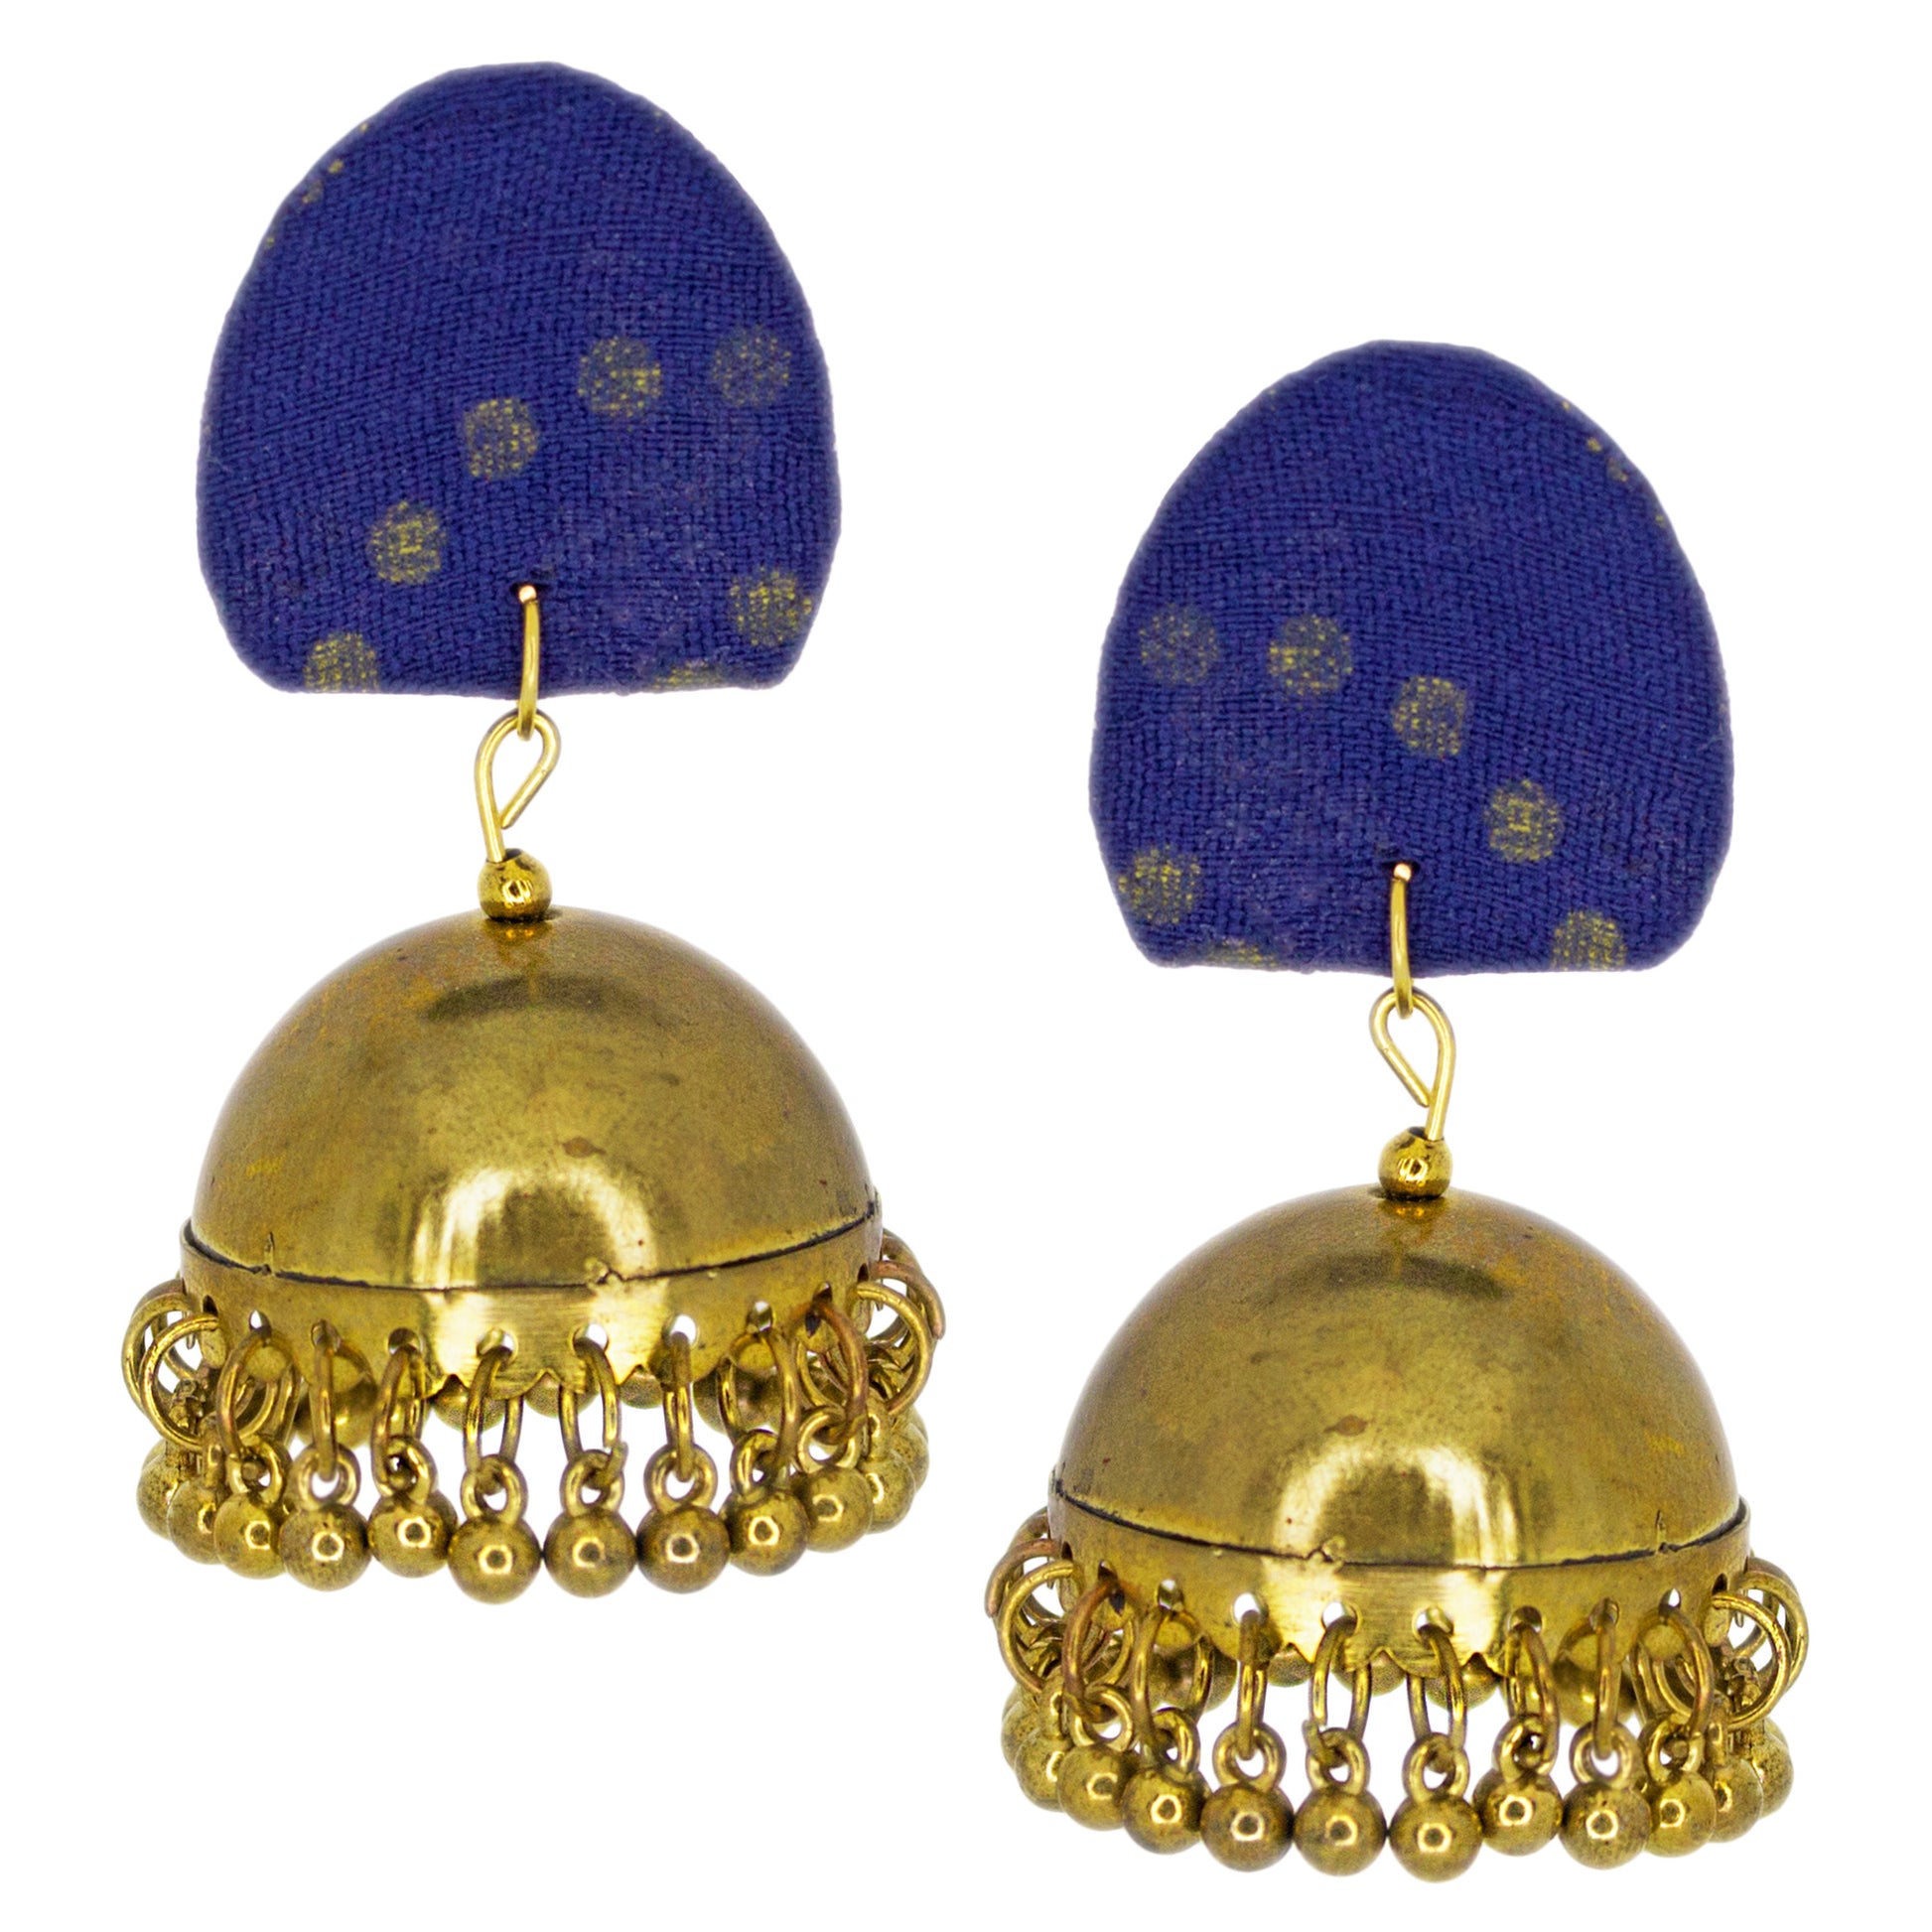 Organic Vibes Handmade Unique Geometric Blue Stud With Golden Jhumka Fabric Earrings For Women